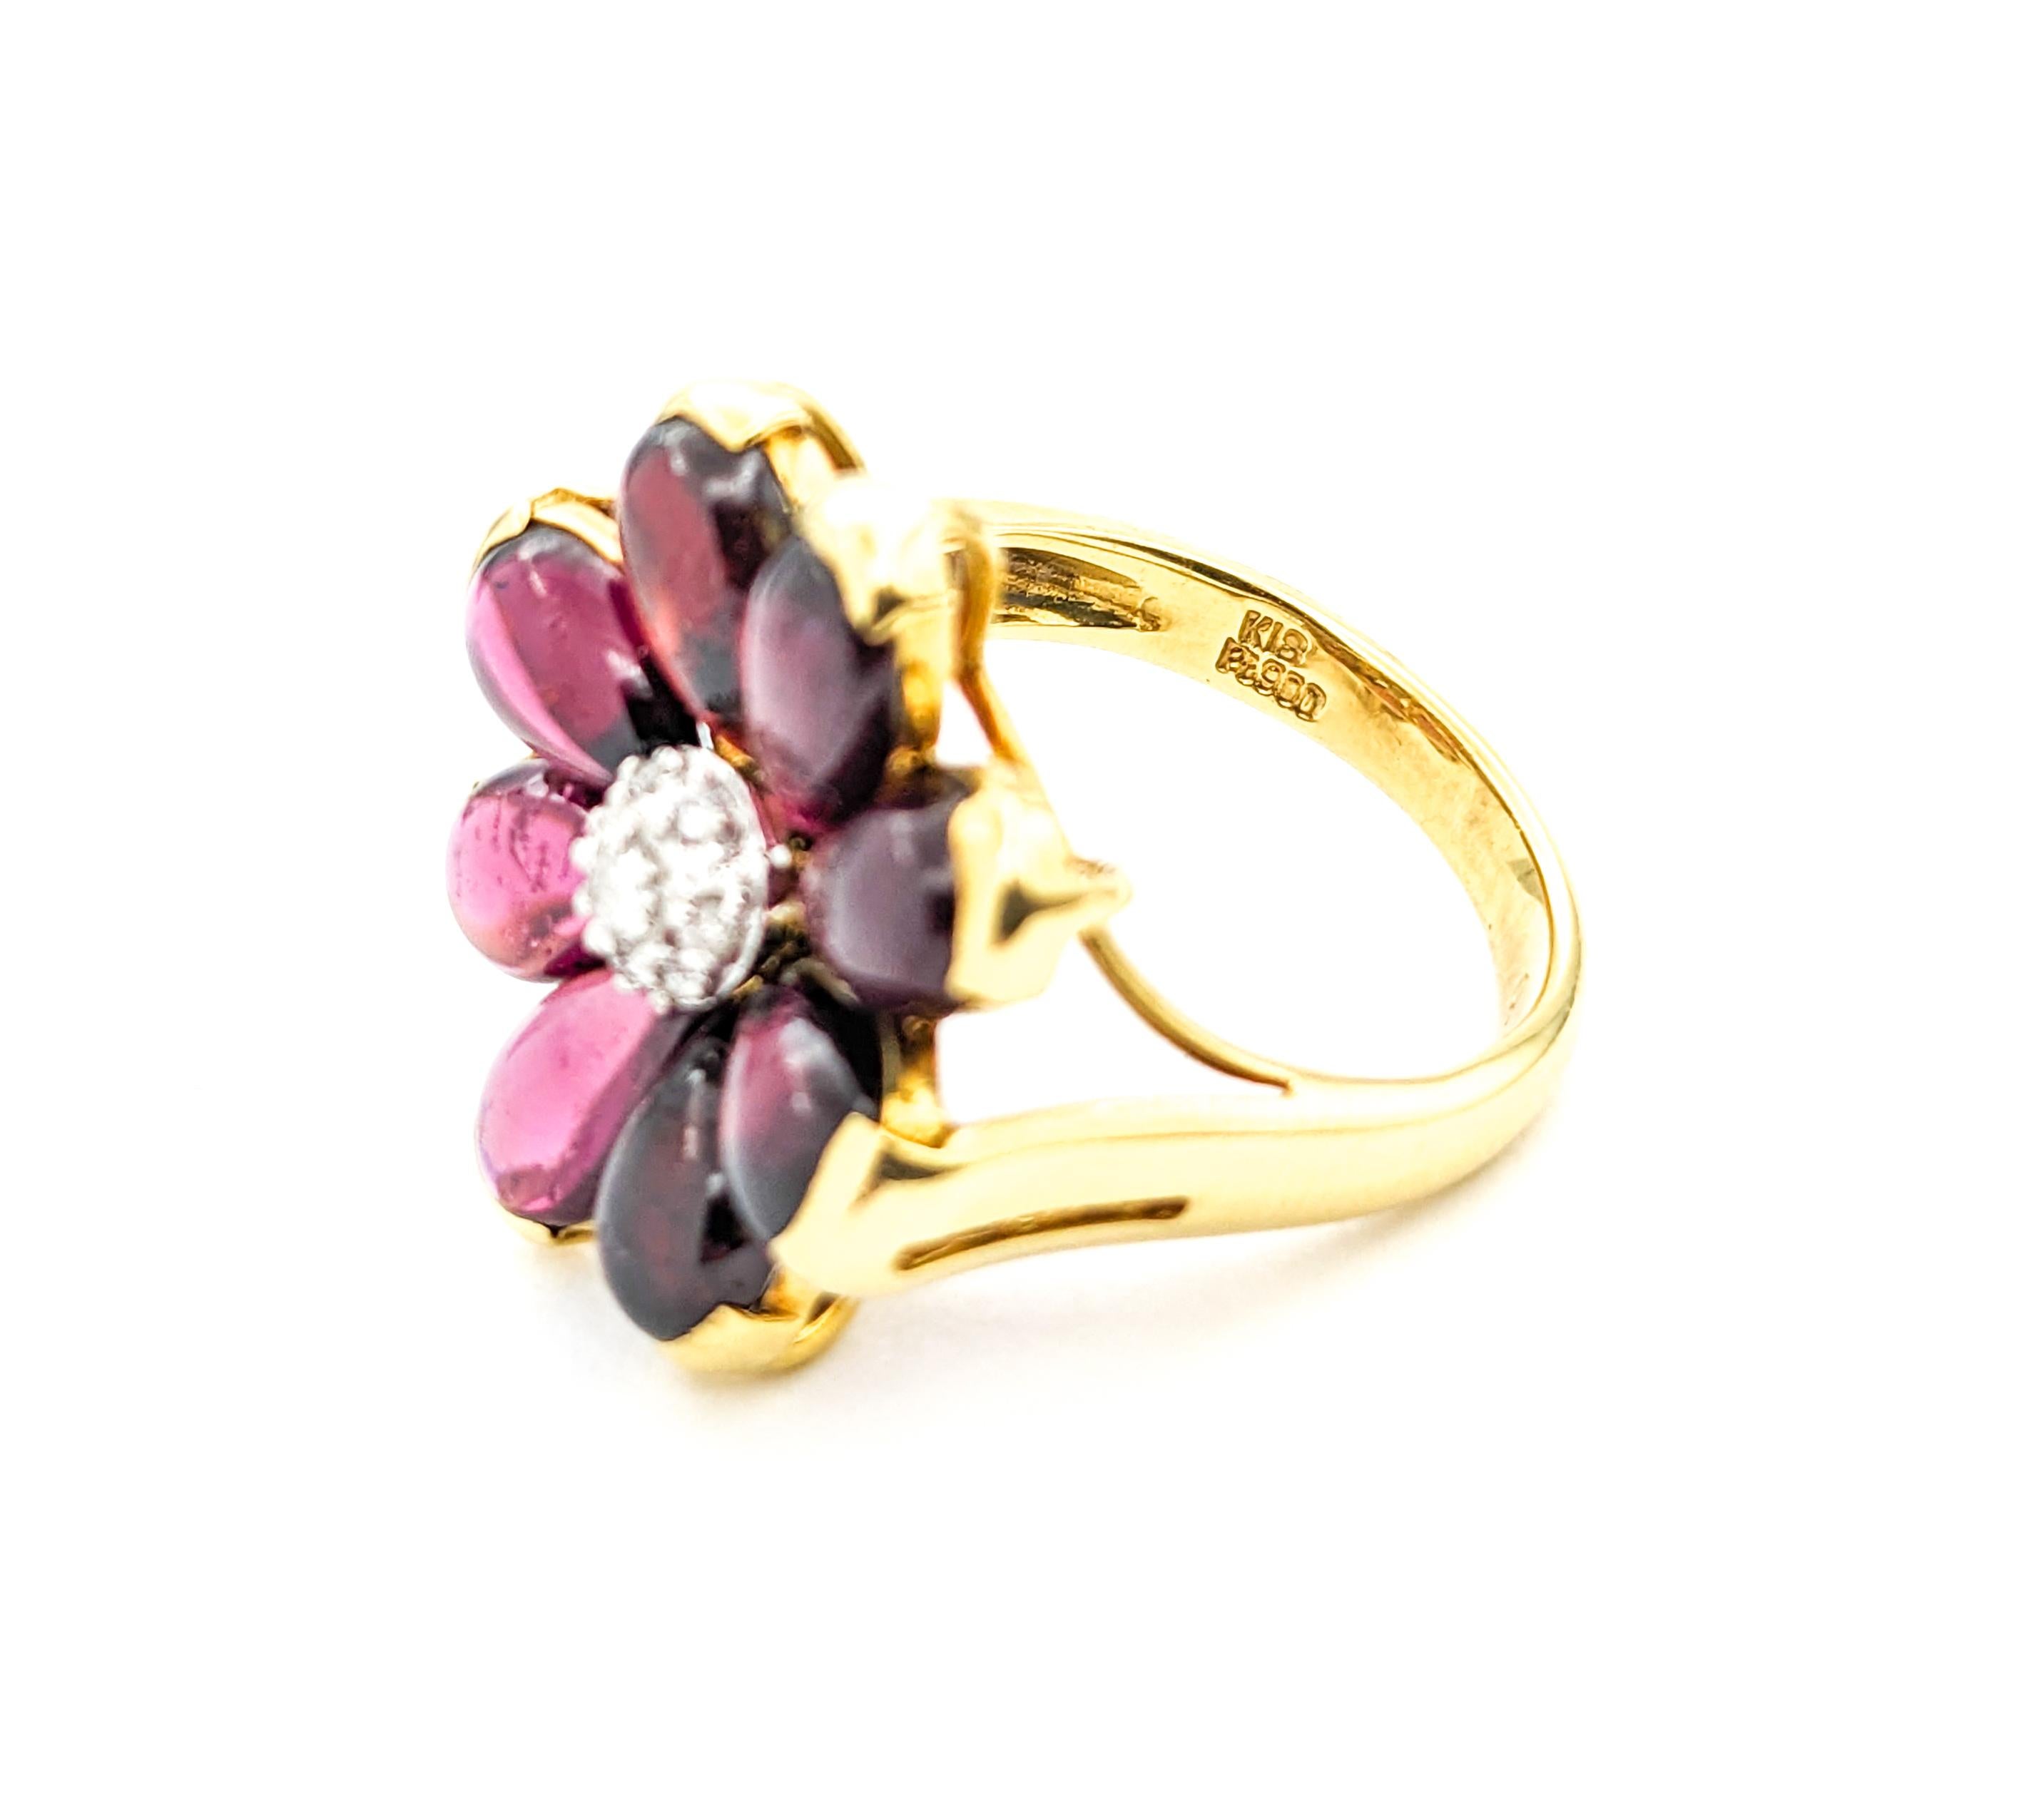 6ctw Pink Tourmaline Cabochon & Diamond Flower Ring In Yellow Gold In Excellent Condition For Sale In Bloomington, MN